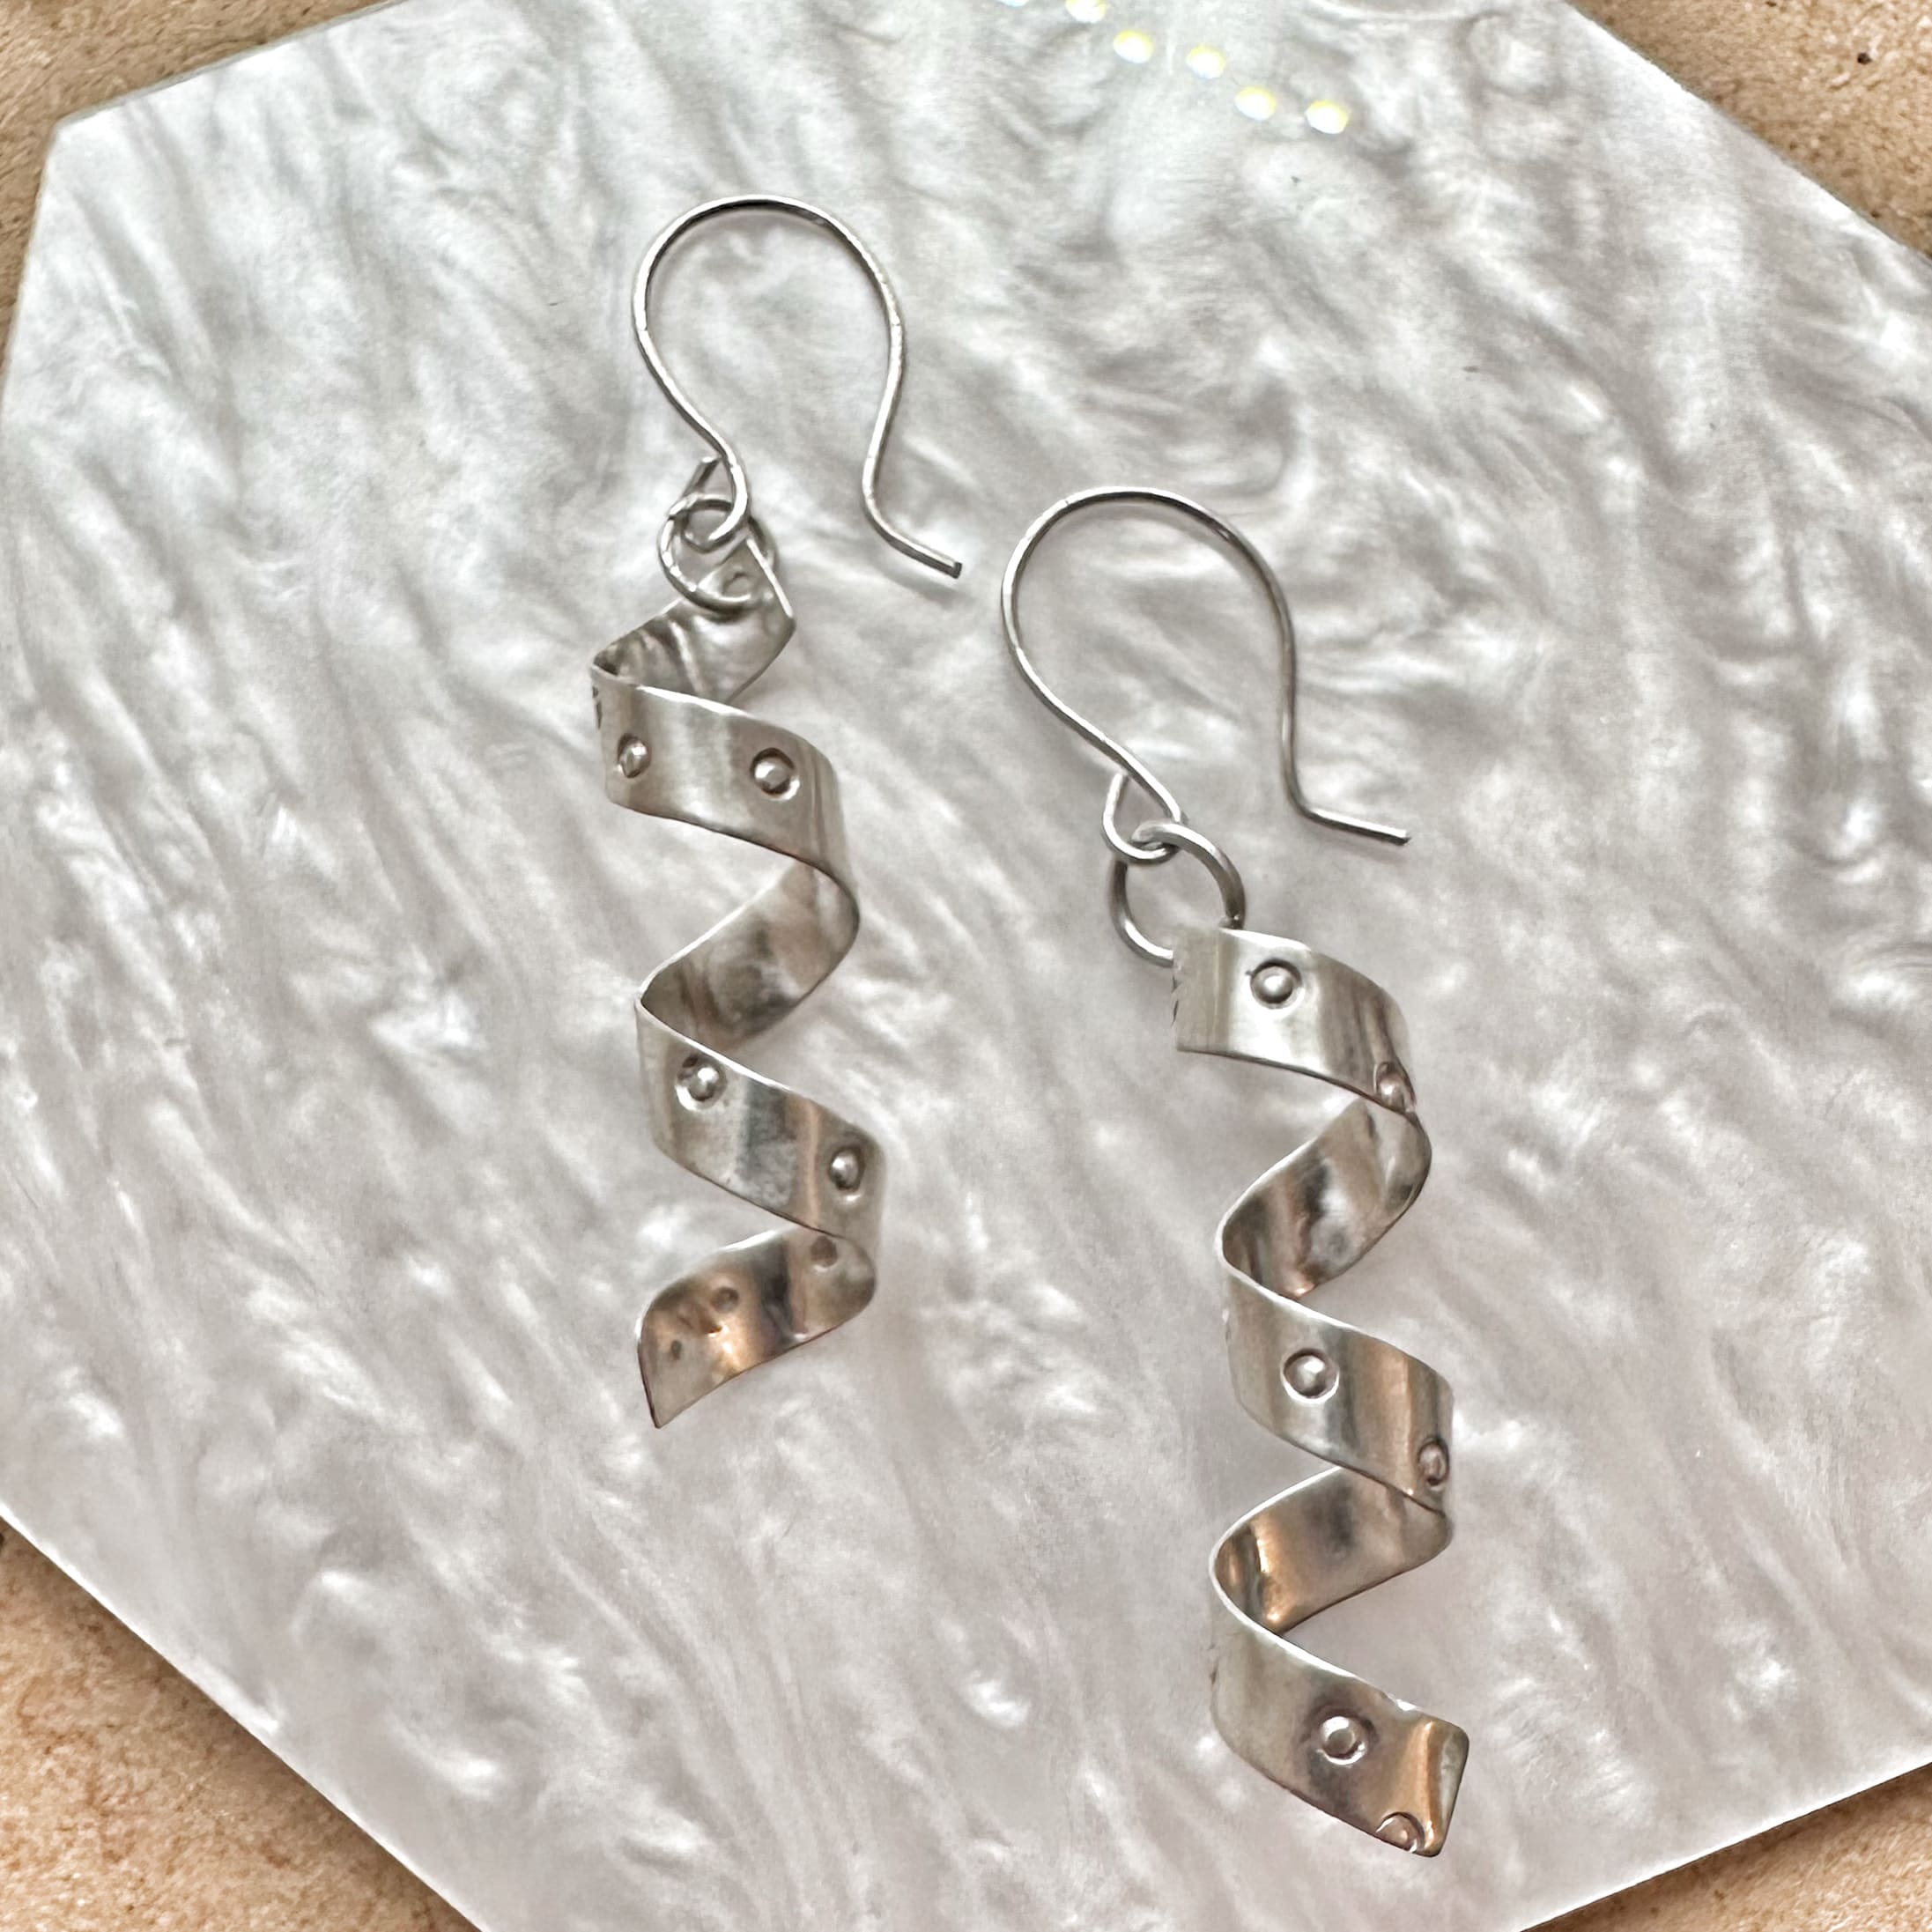 Corkscrew earrings in silver. Hand stamped and formed. 